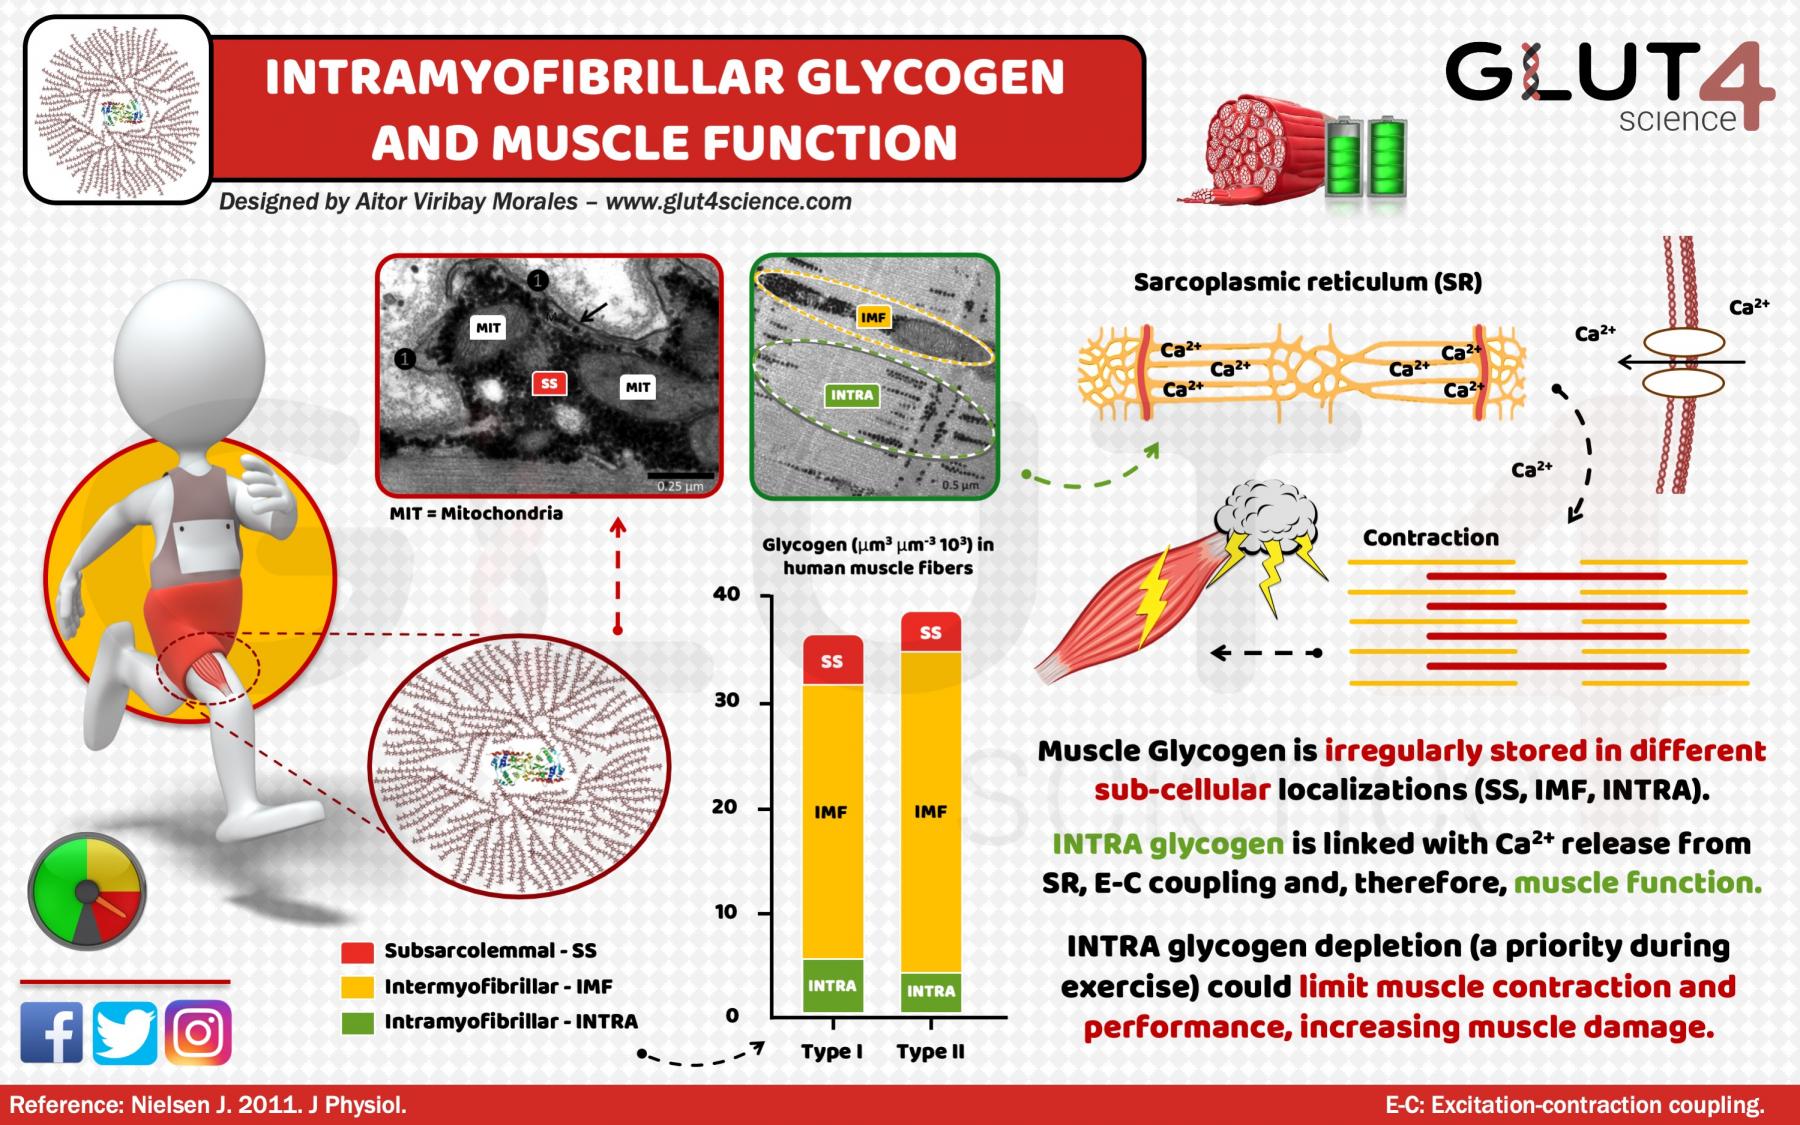 Intramyofibrilar Glycogen and Muscle Contraction